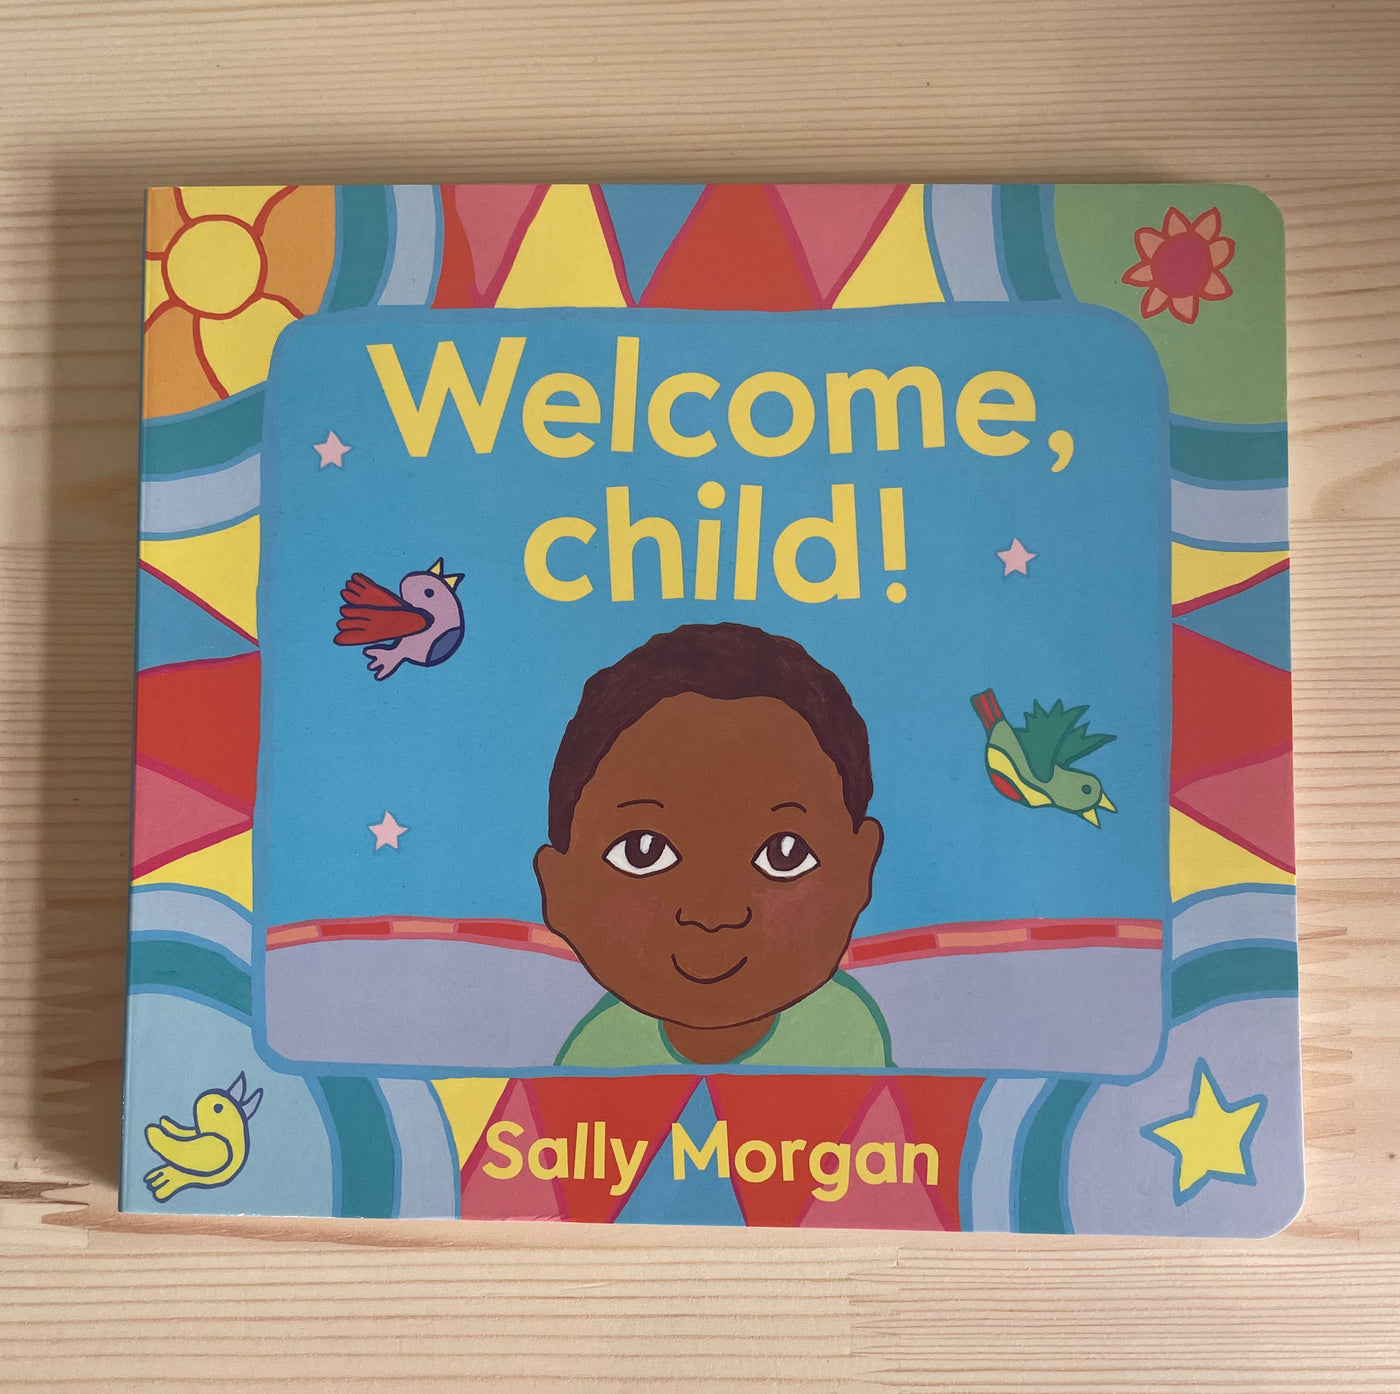 Welcome, child!- Sally Morgan